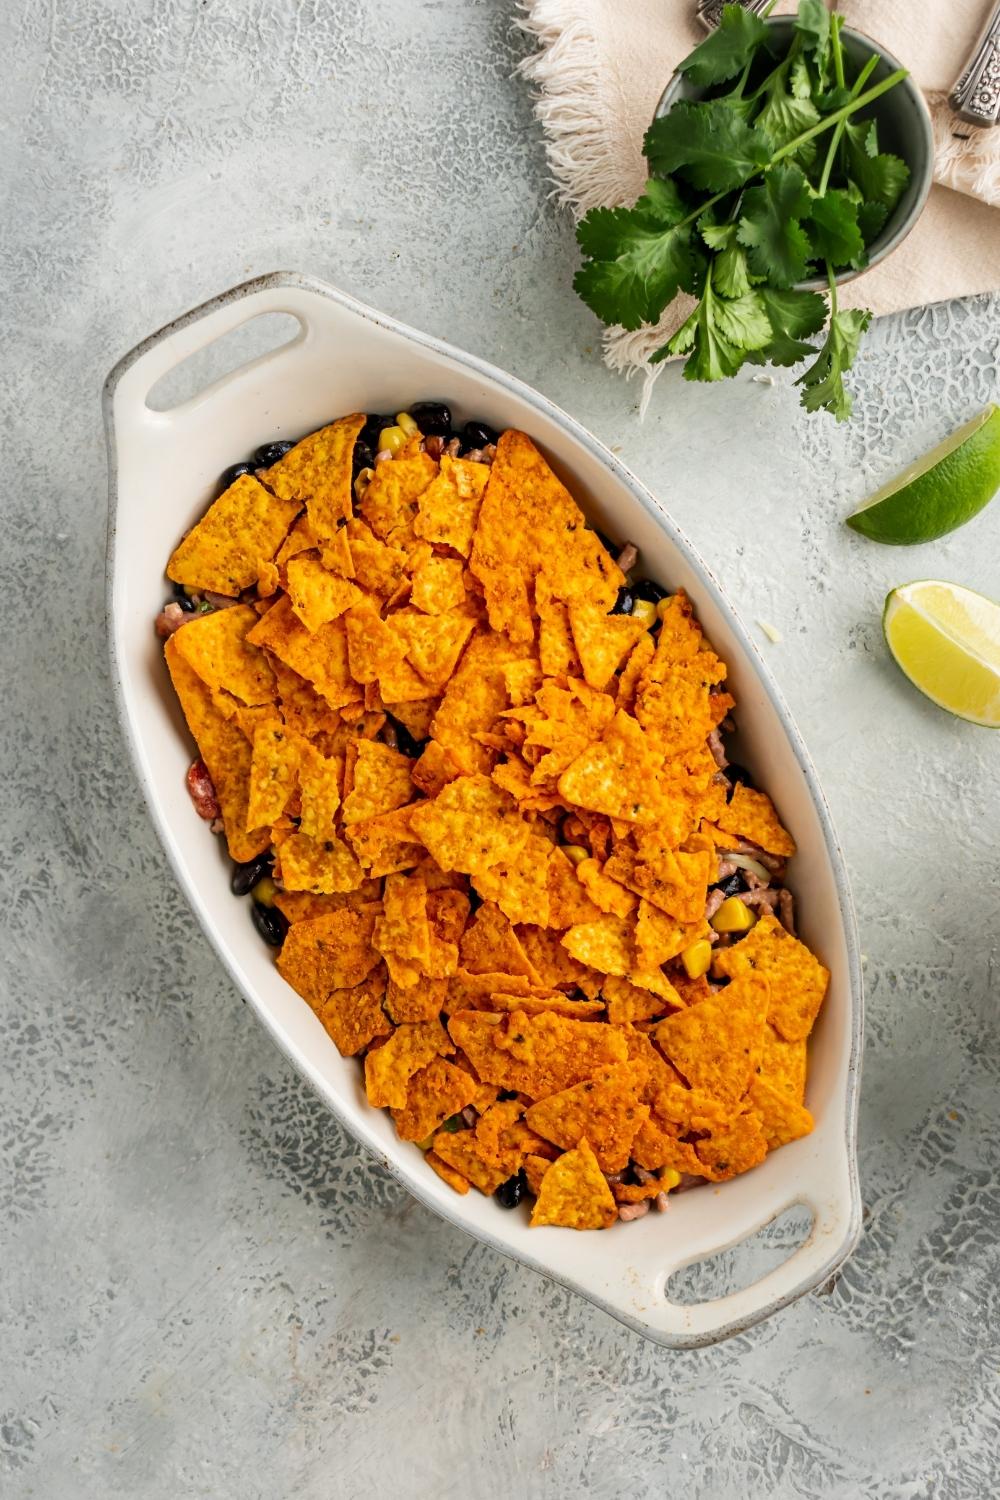 Crushed nacho cheese flavored Doritos on top of the Doritos casserole in the white casserole dish.